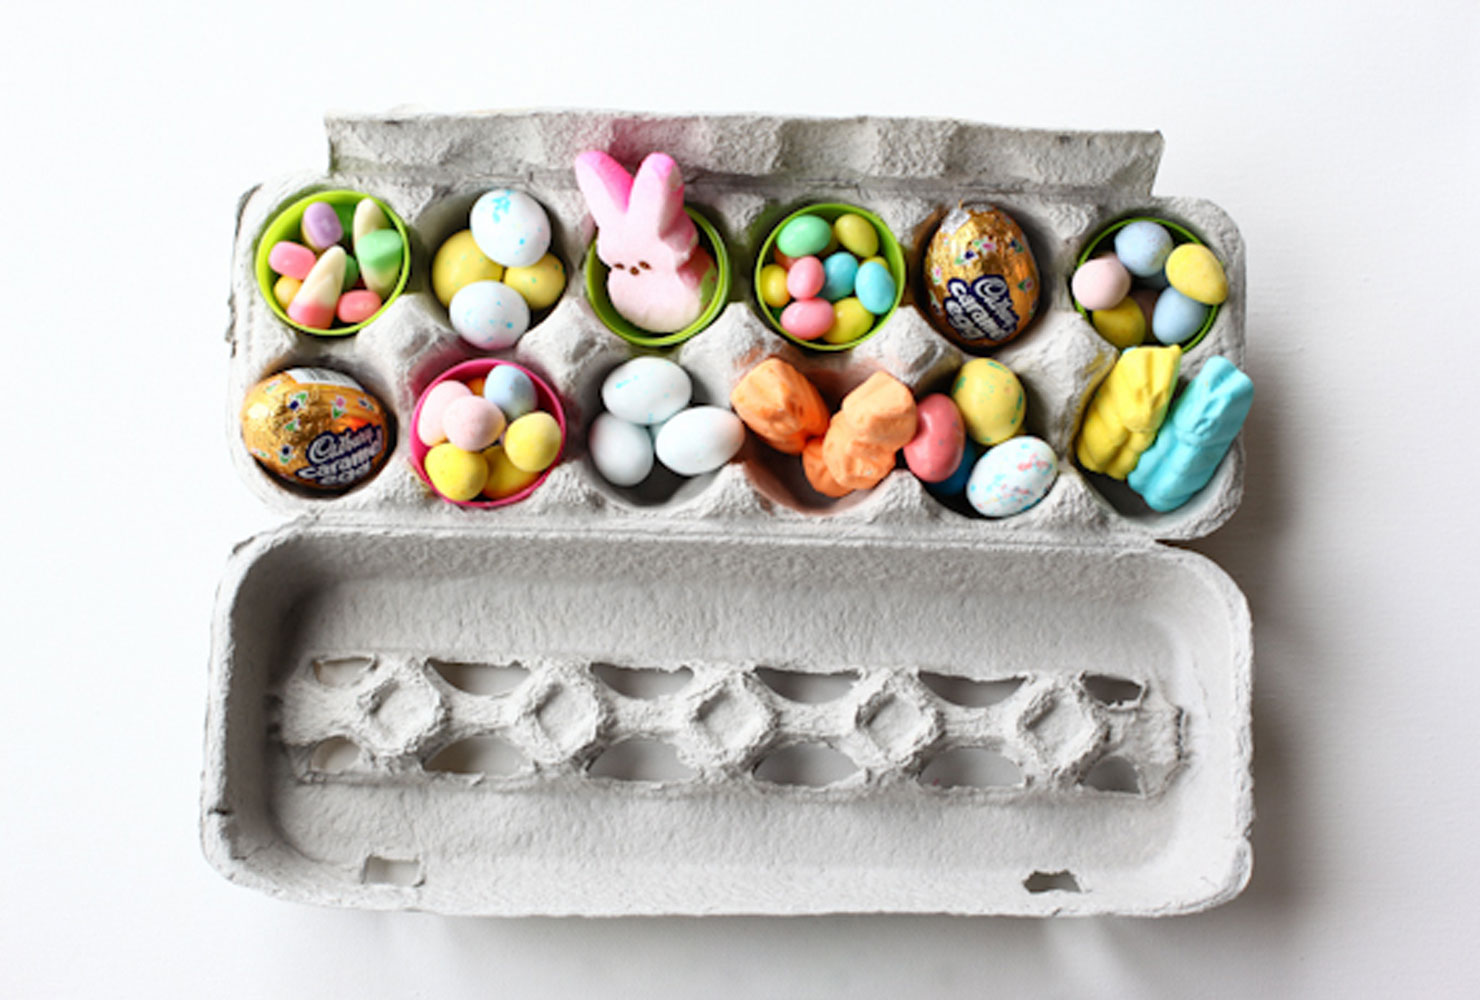 Colorful plastic eggs filled with candies in an egg carton